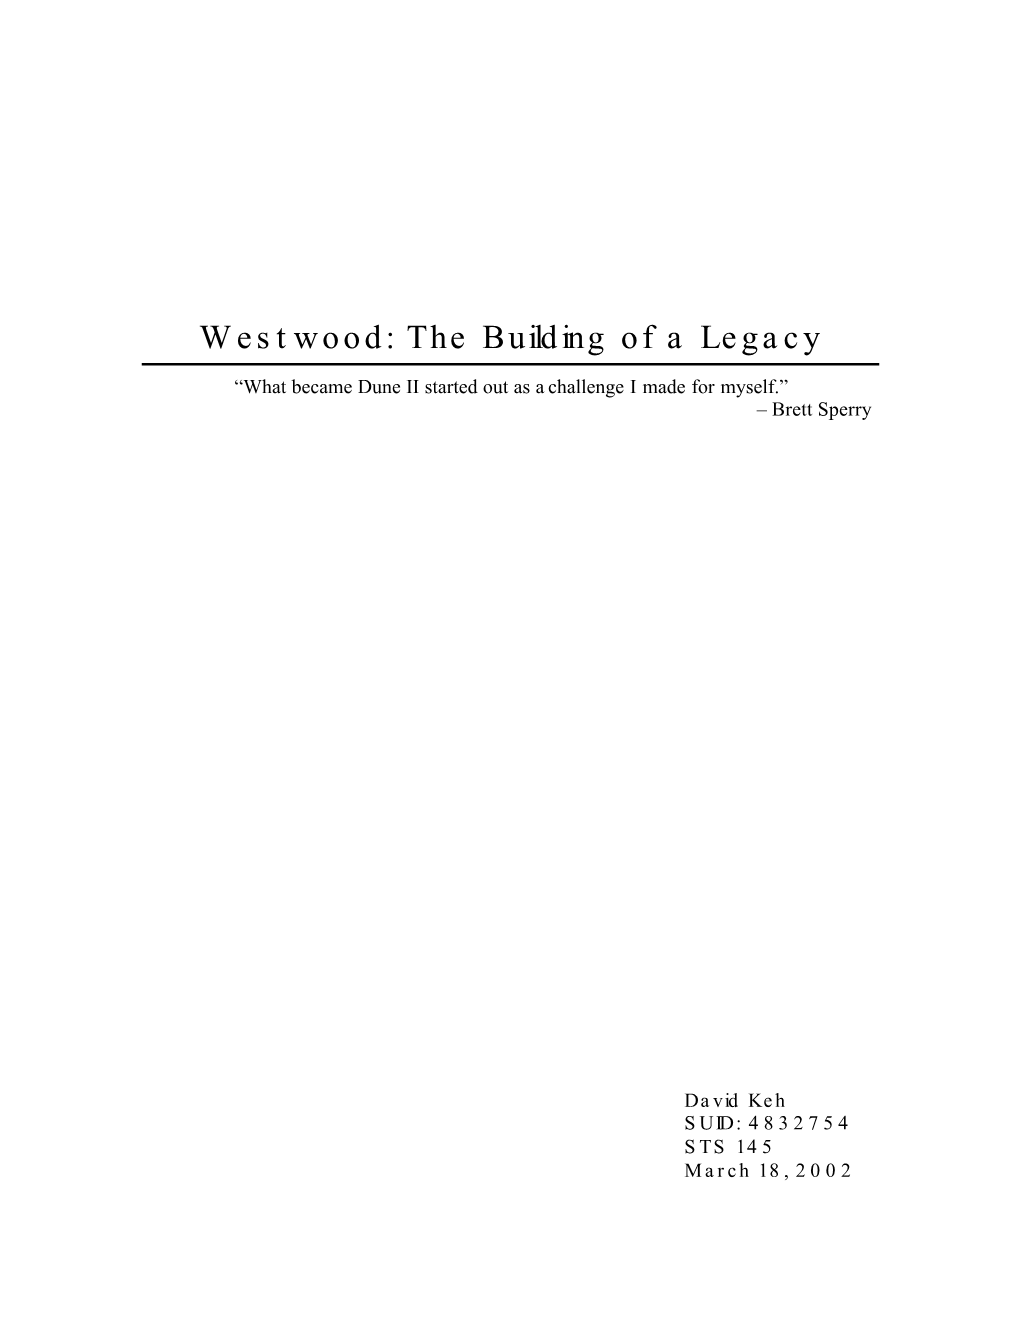 Westwood: the Building of a Legacy